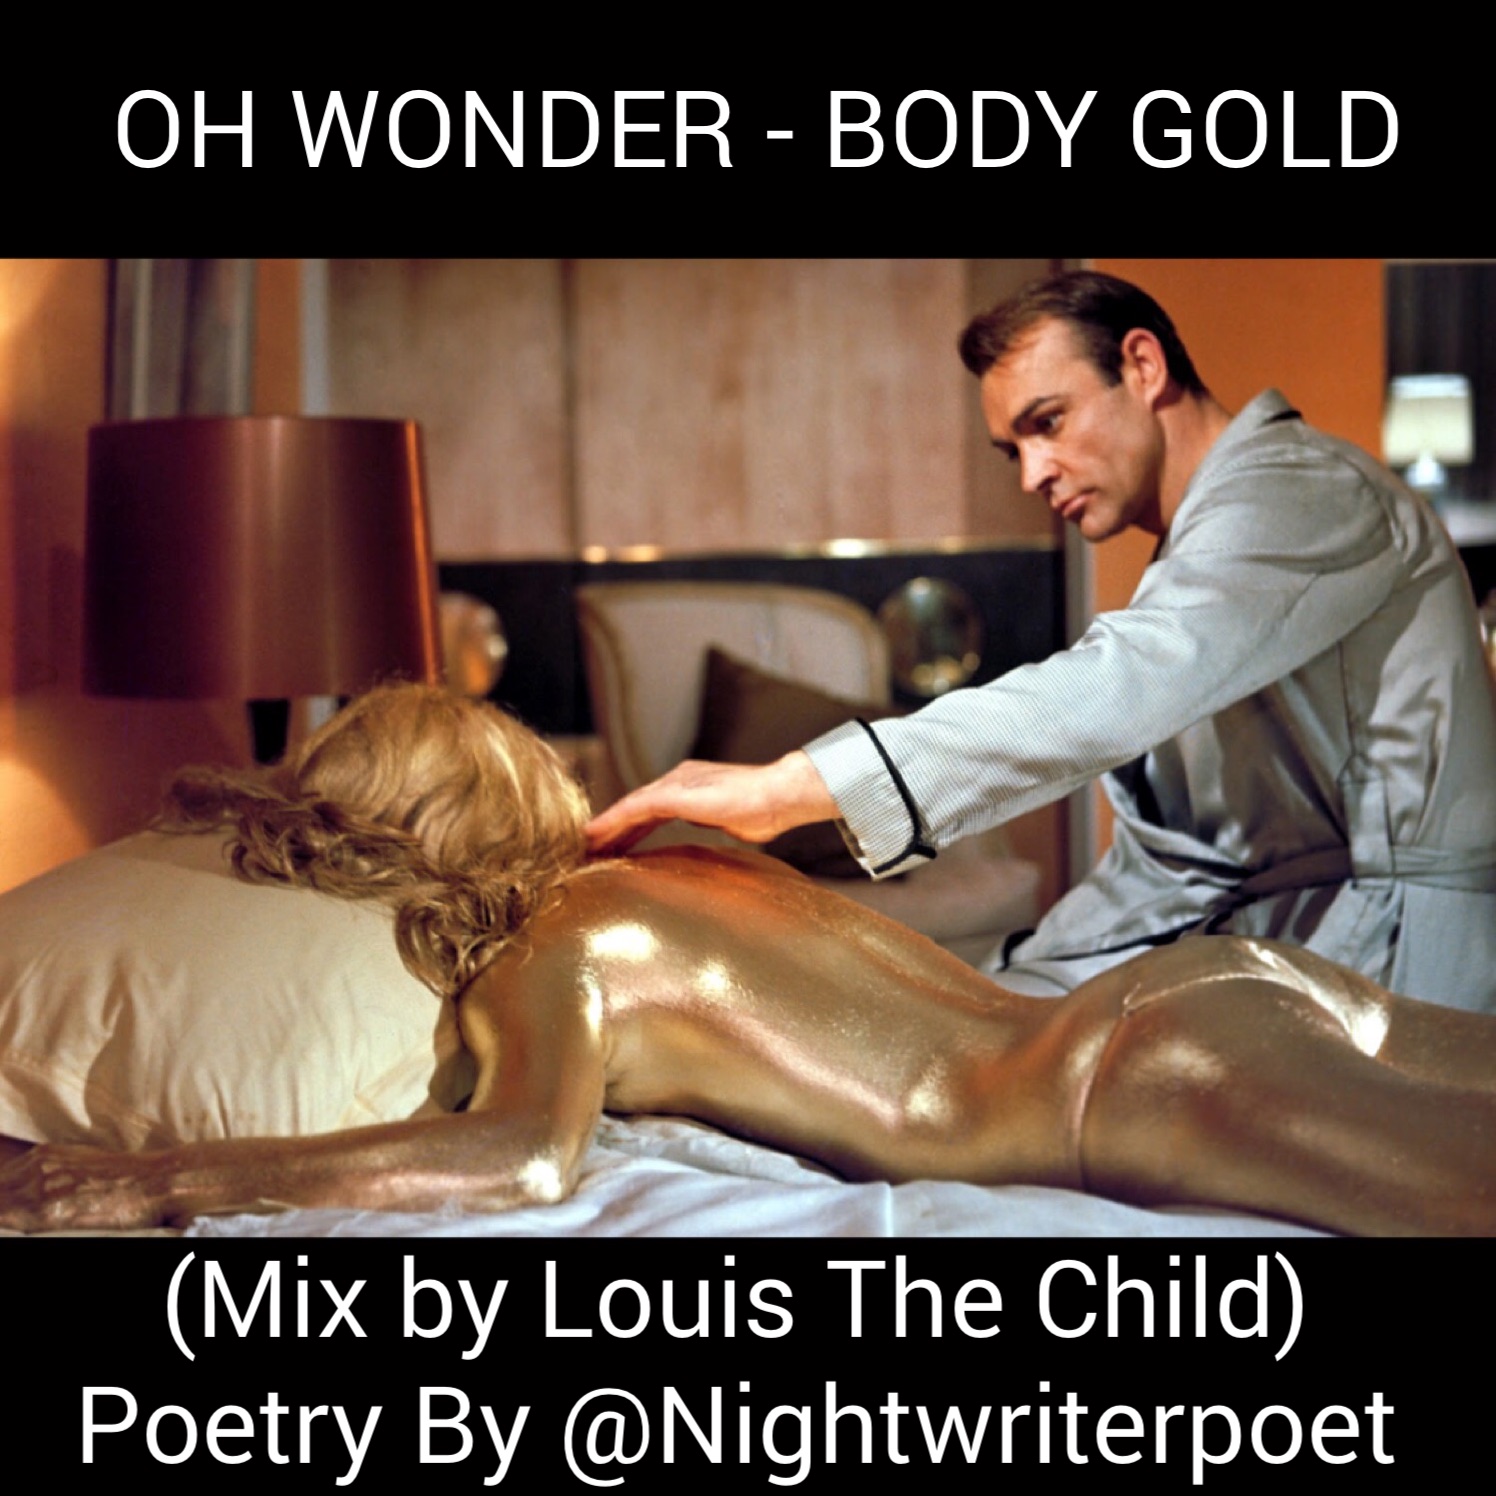 Body Gold By Oh Wonder (Mix By Louis The Child) Poetry By @Nightwriterpoet